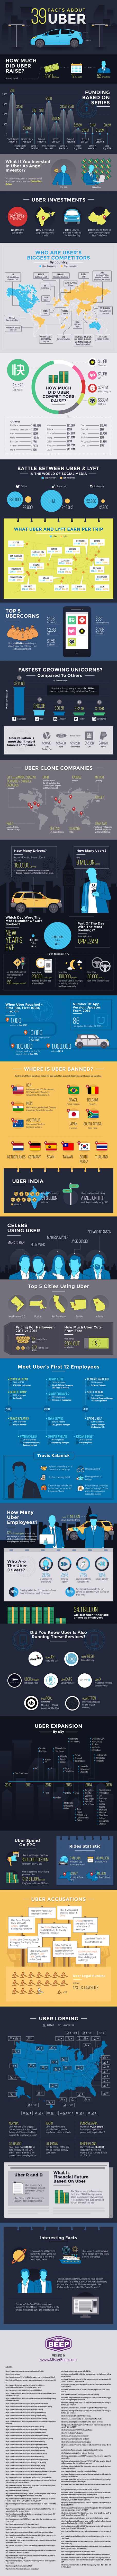 facts_about_uber